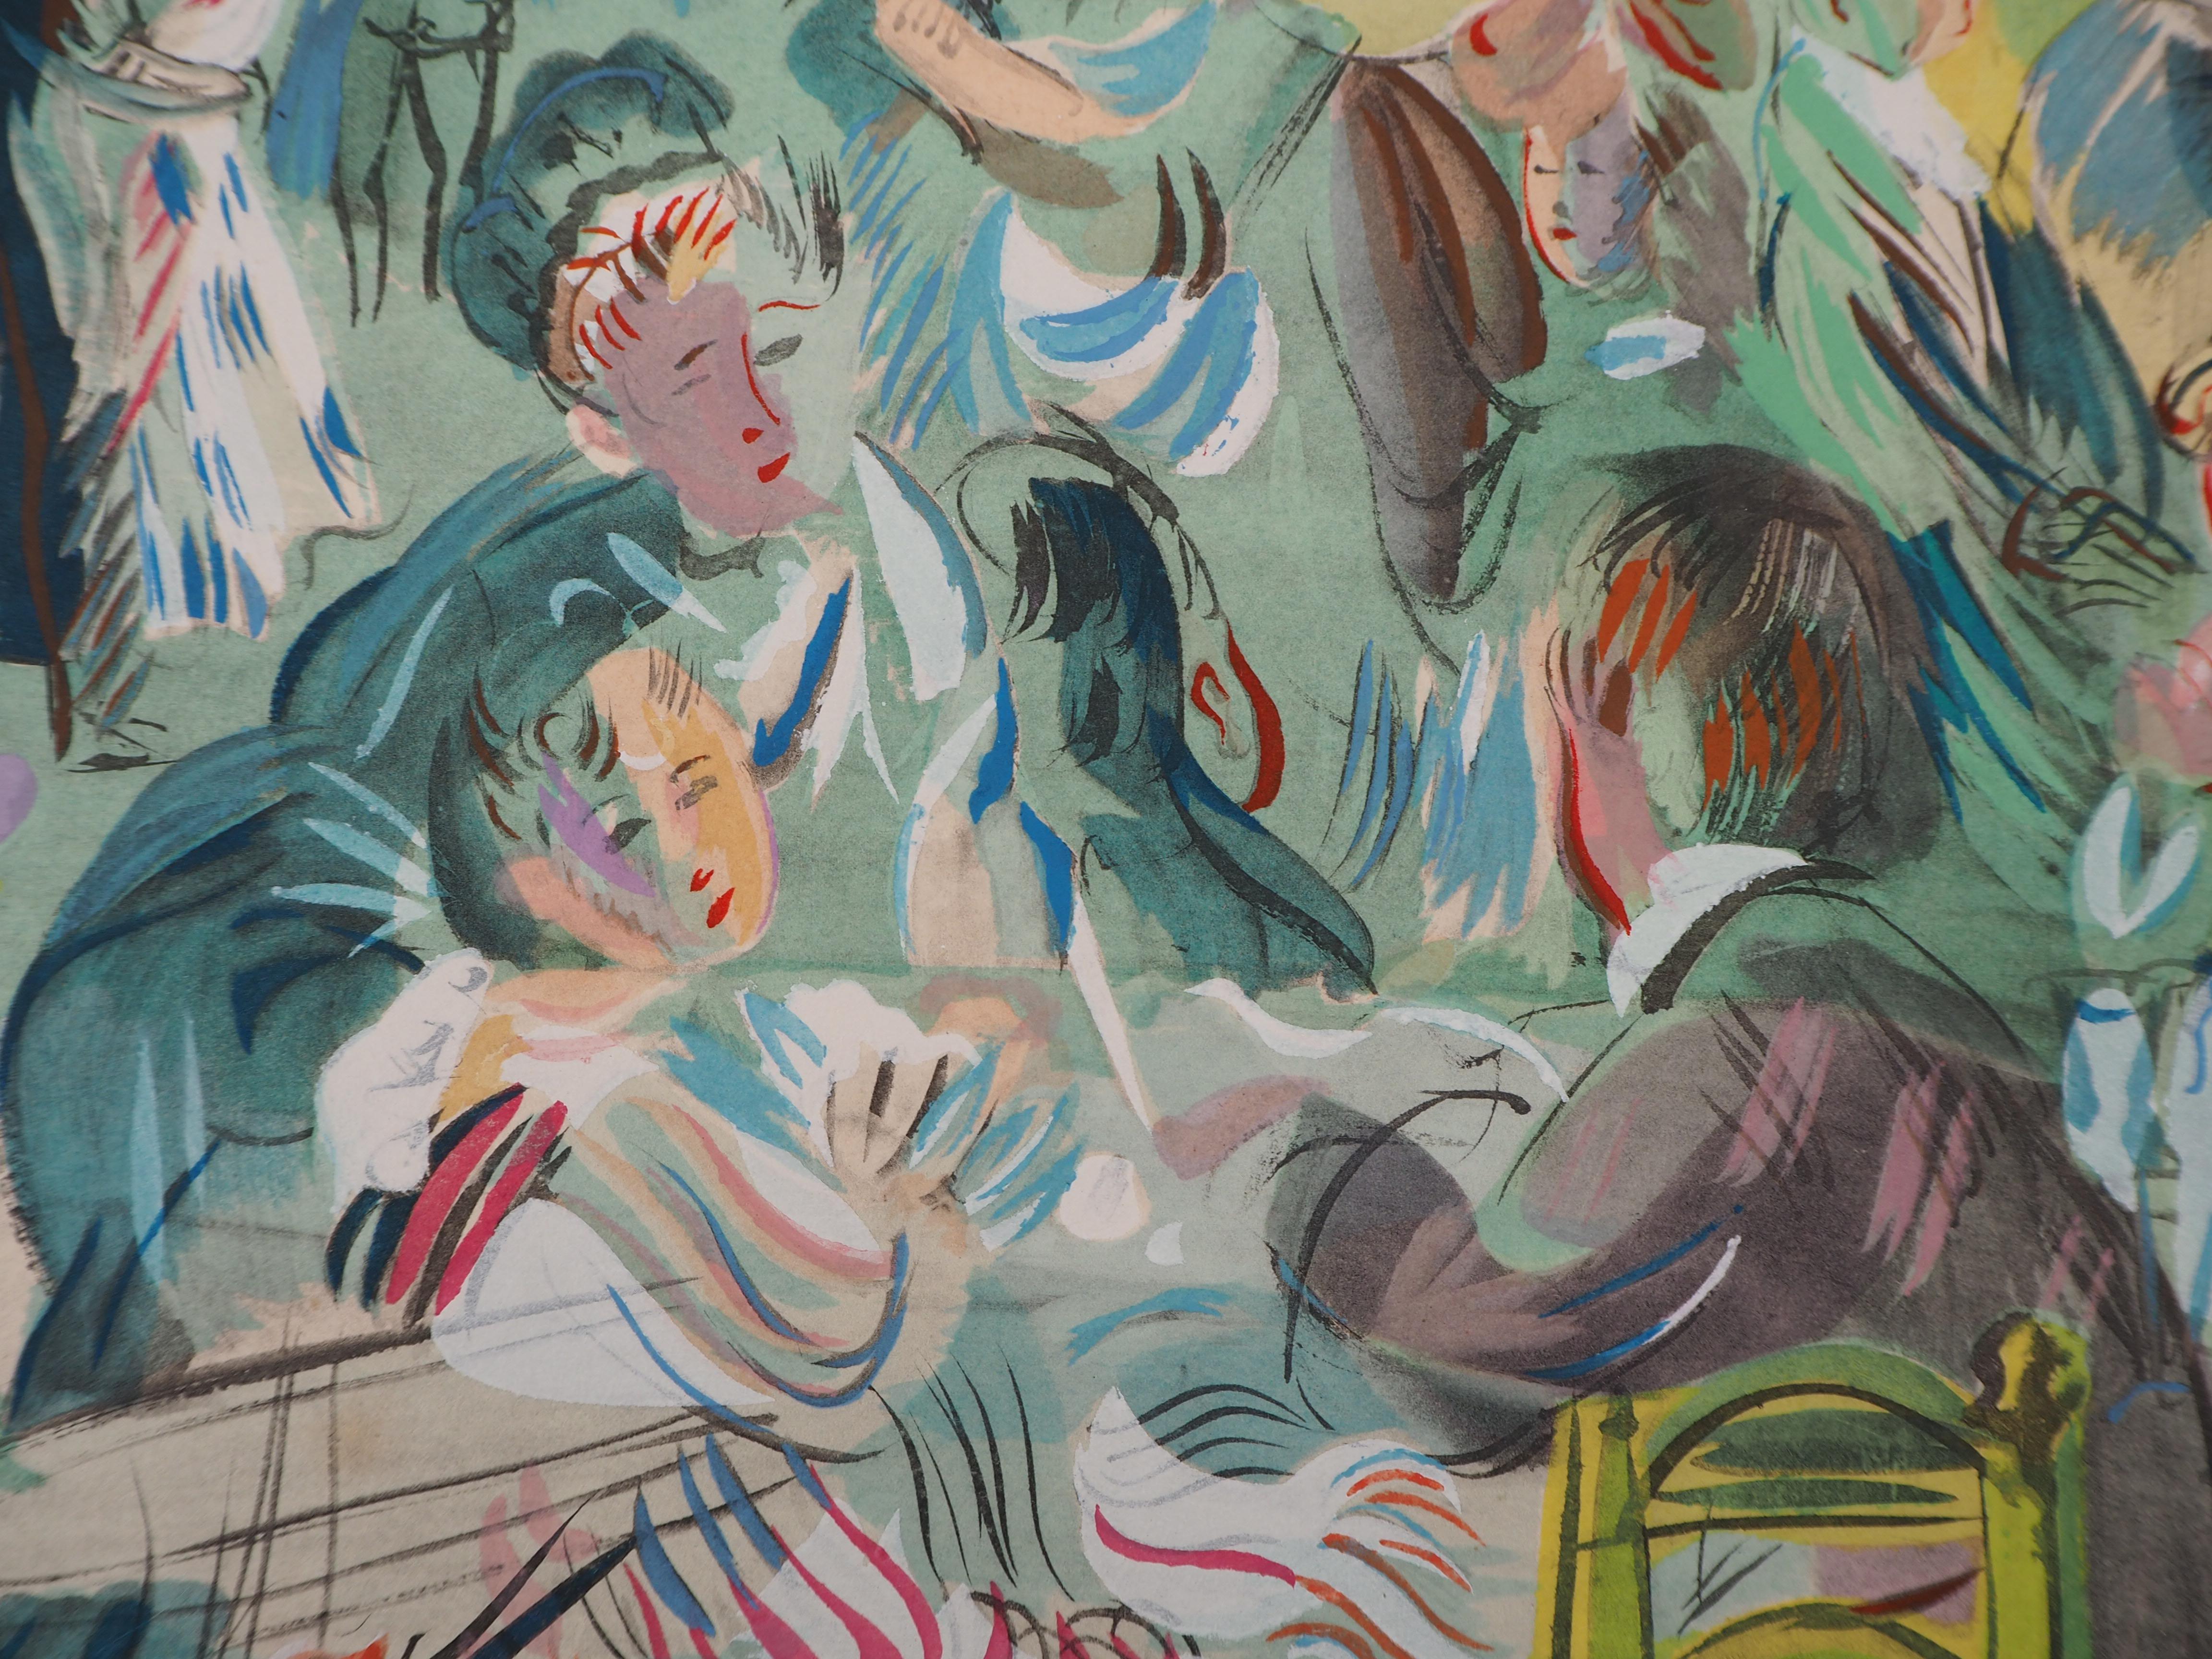 Raoul DUFY
Dancing Cafe, 1953

Original Lithograph with stencil watercolor
With printed signature in the plate
On Arches vellum
28 x 38 cm (c. 11 x 15 inch)

Excellent condition